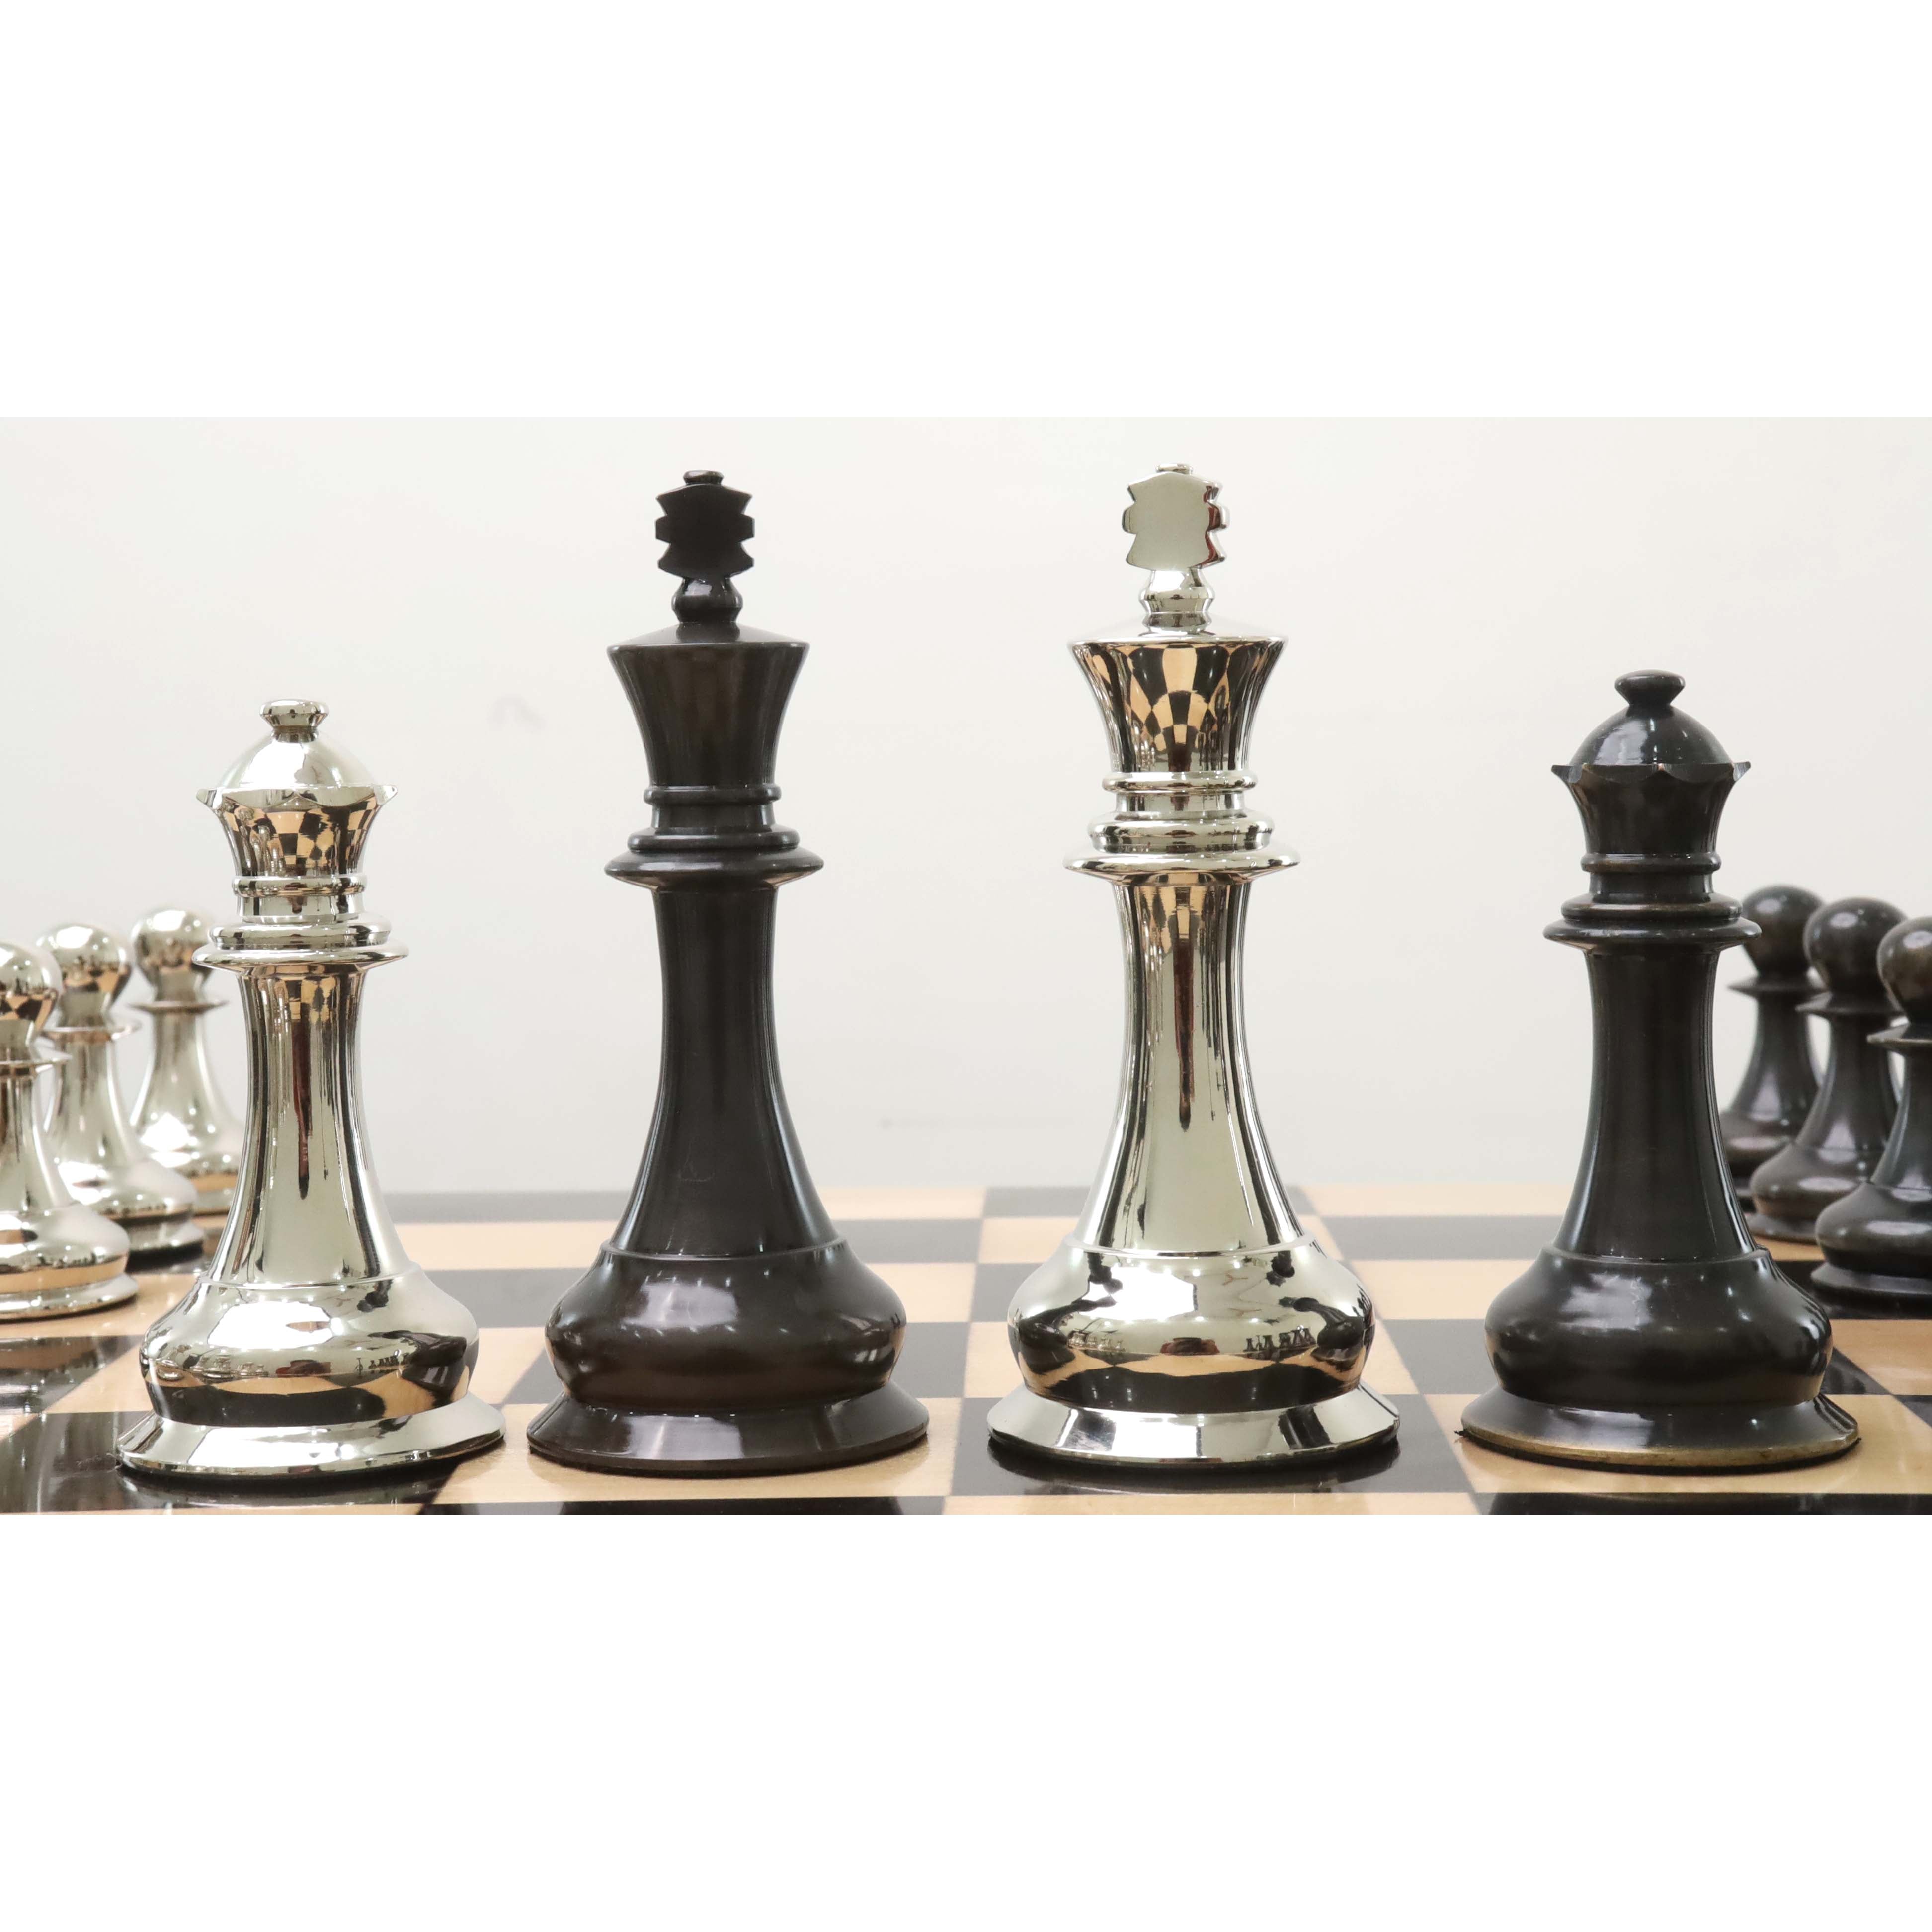 Metal Chess Pieces